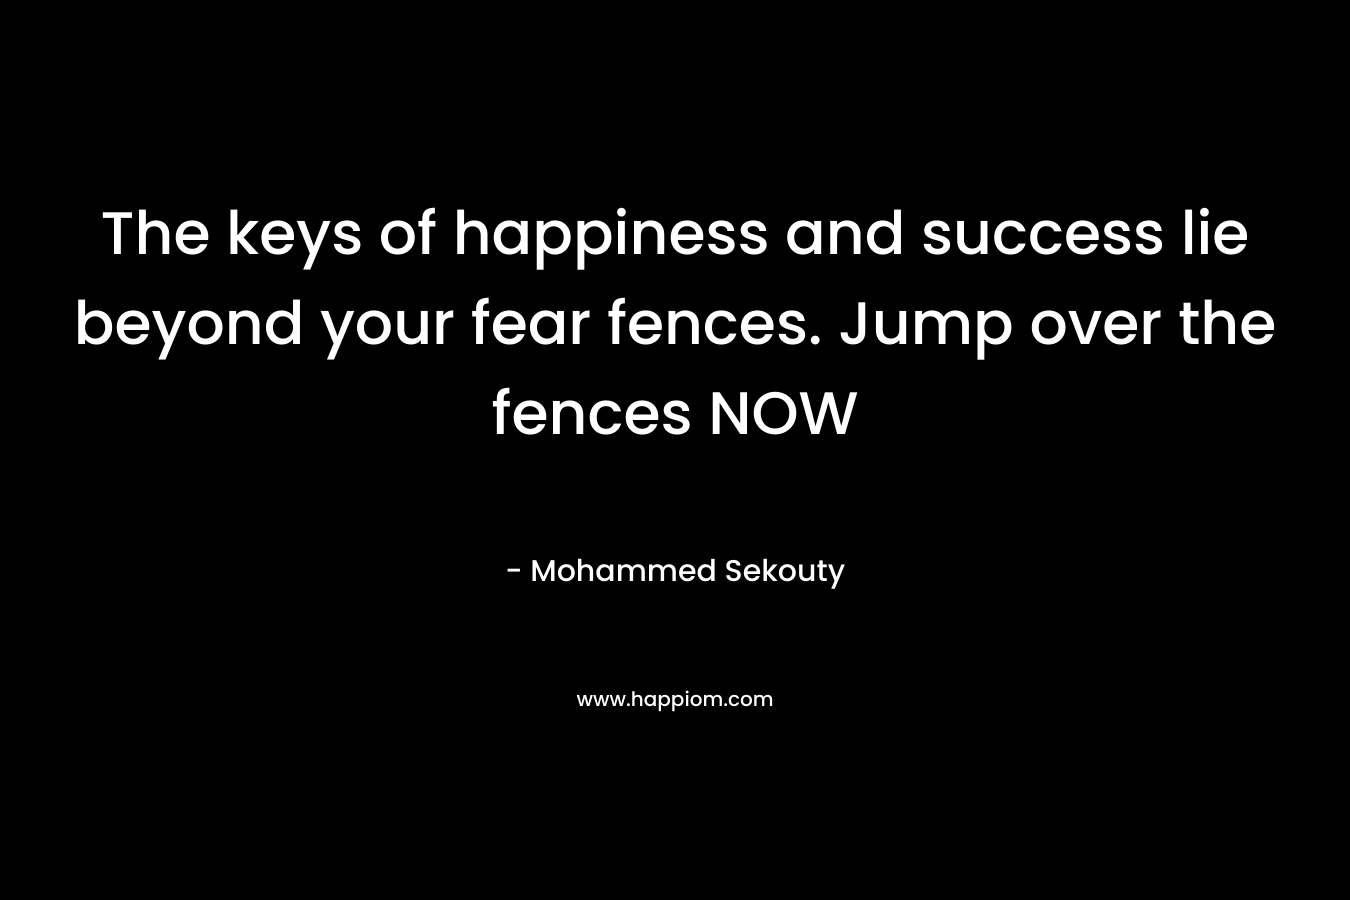 The keys of happiness and success lie beyond your fear fences. Jump over the fences NOW